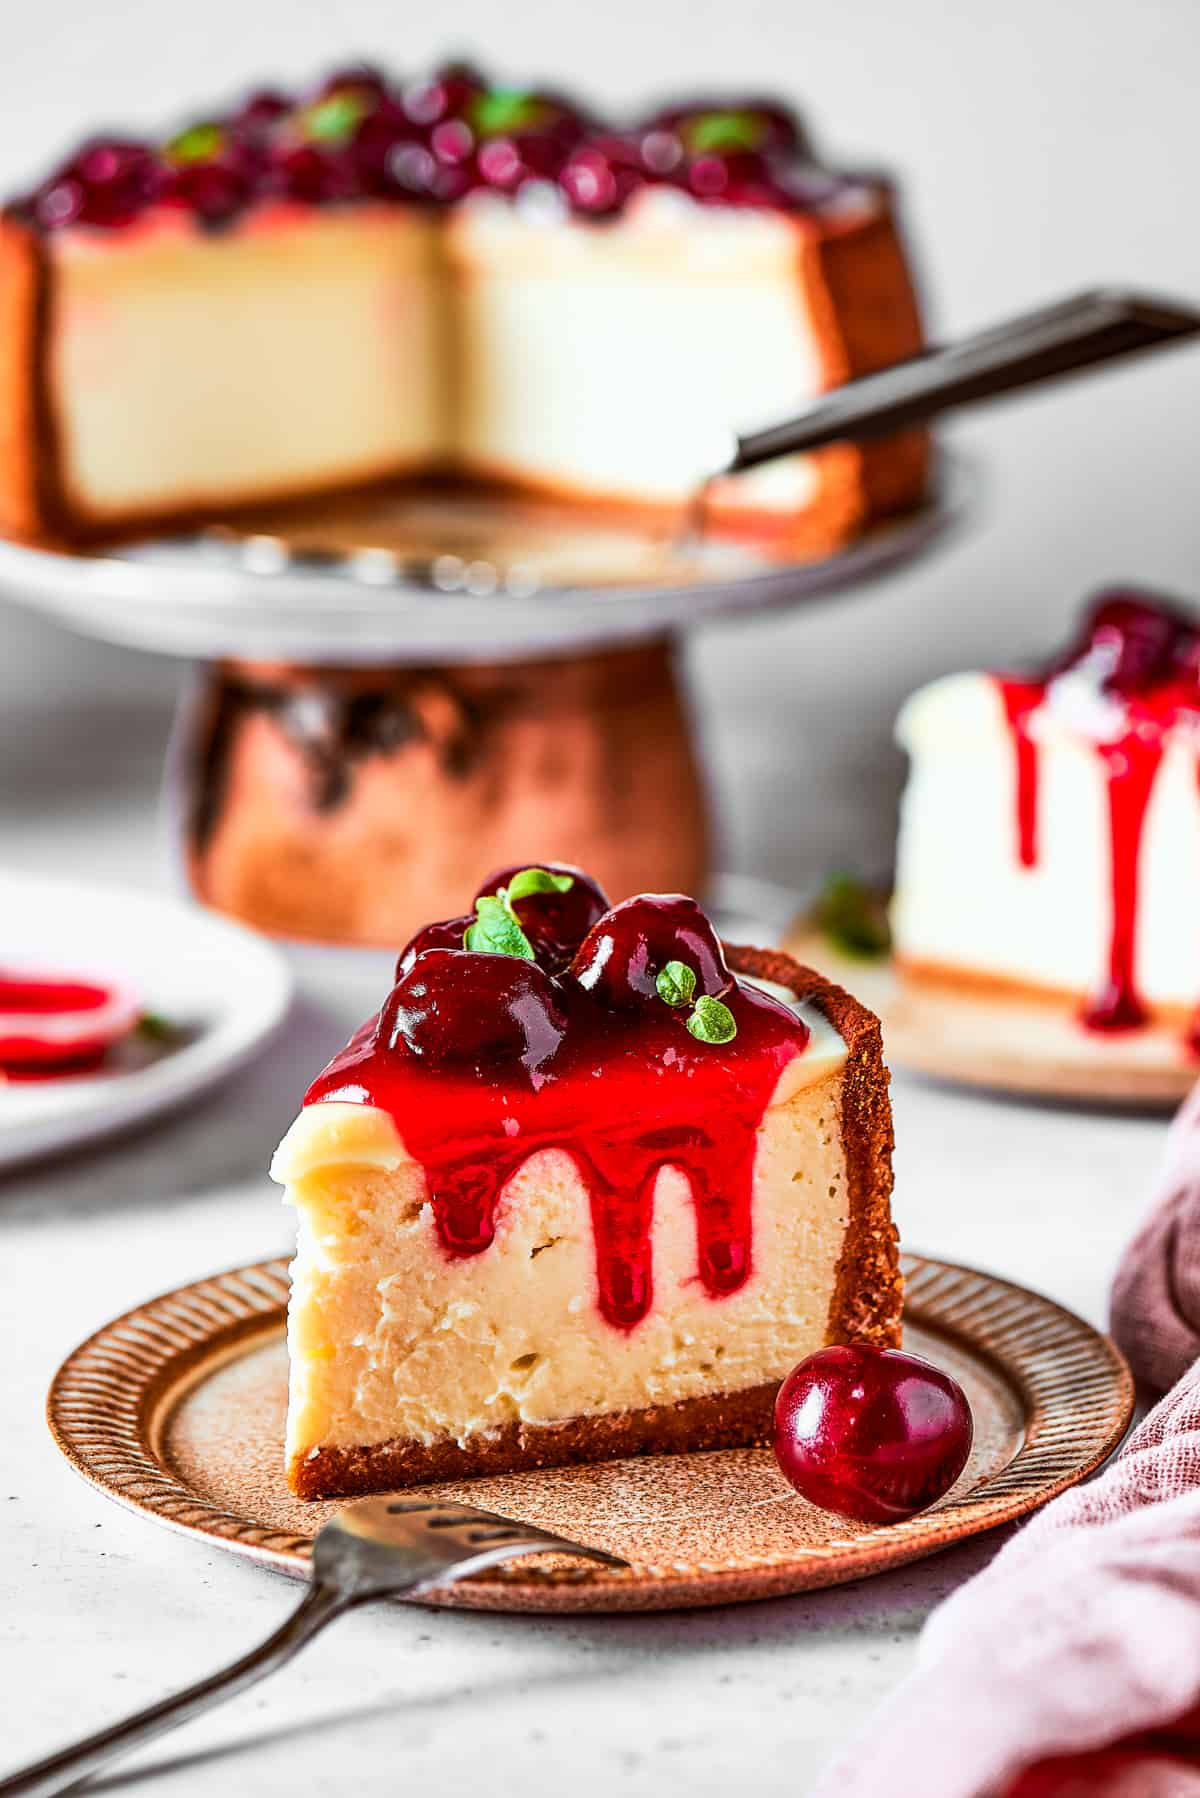 A slice of cheesecake topped with cherries and served on a dessert plate.